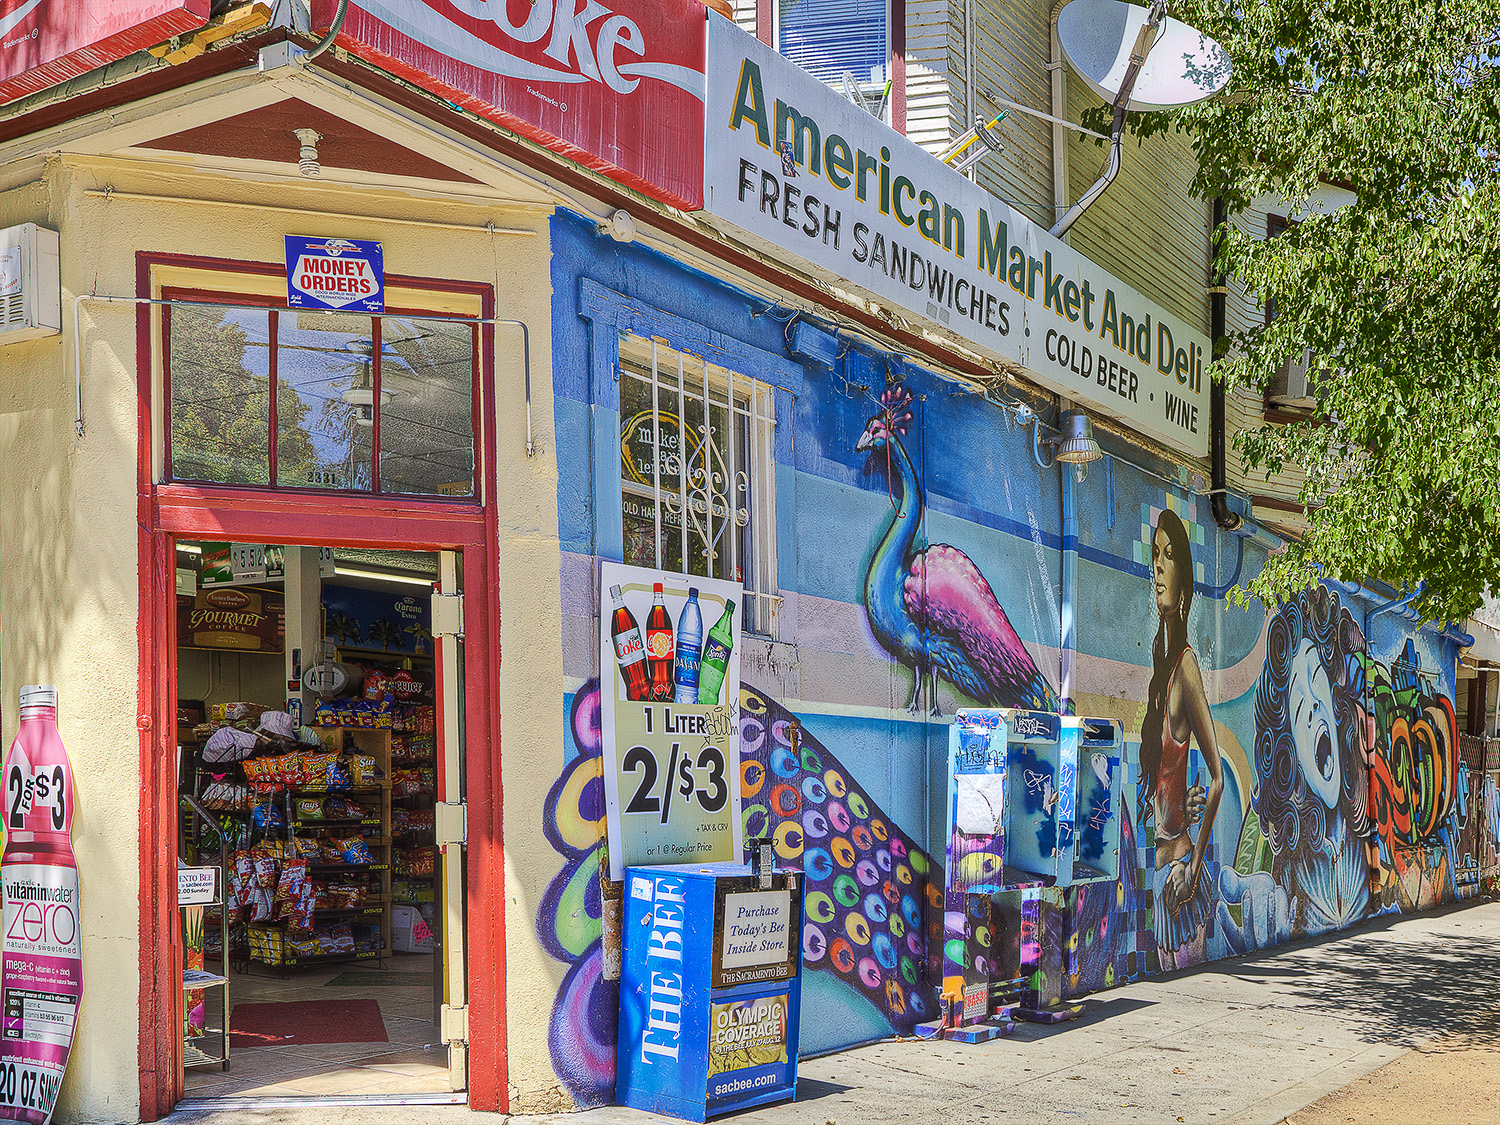 American Market and Deli, 2331 N St.